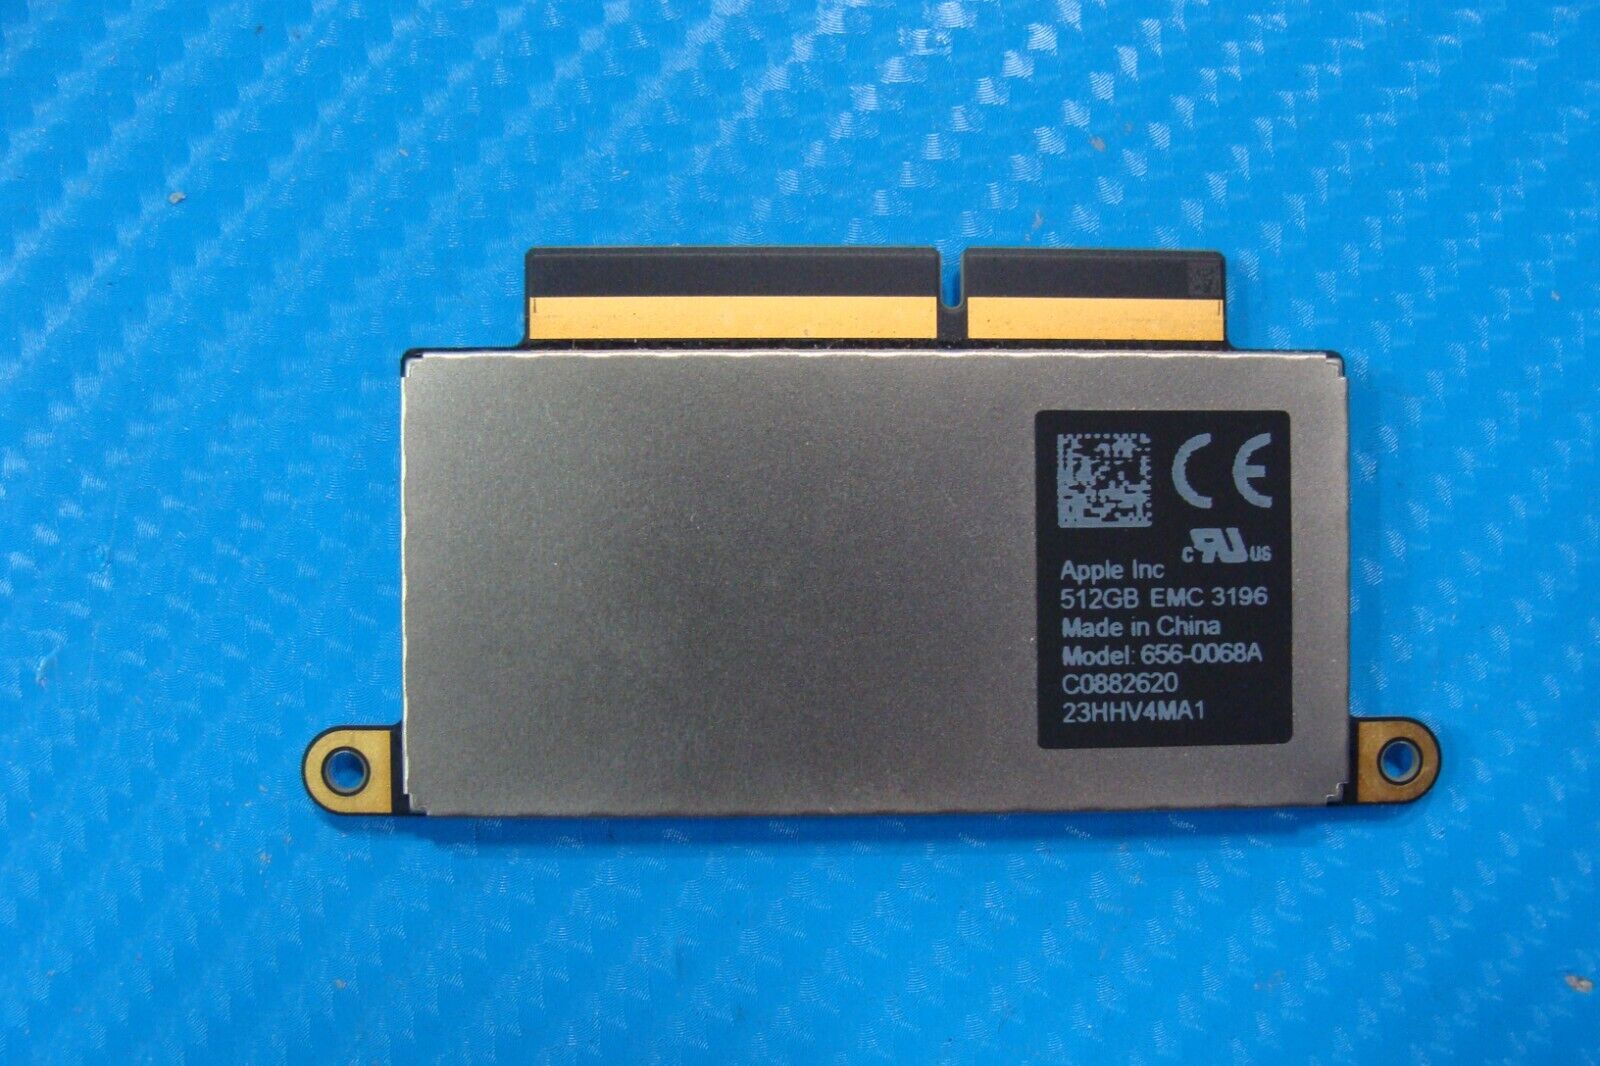 MacBook Pro A1708 Apple 512GB SSD Solid State Drive 656-0068A